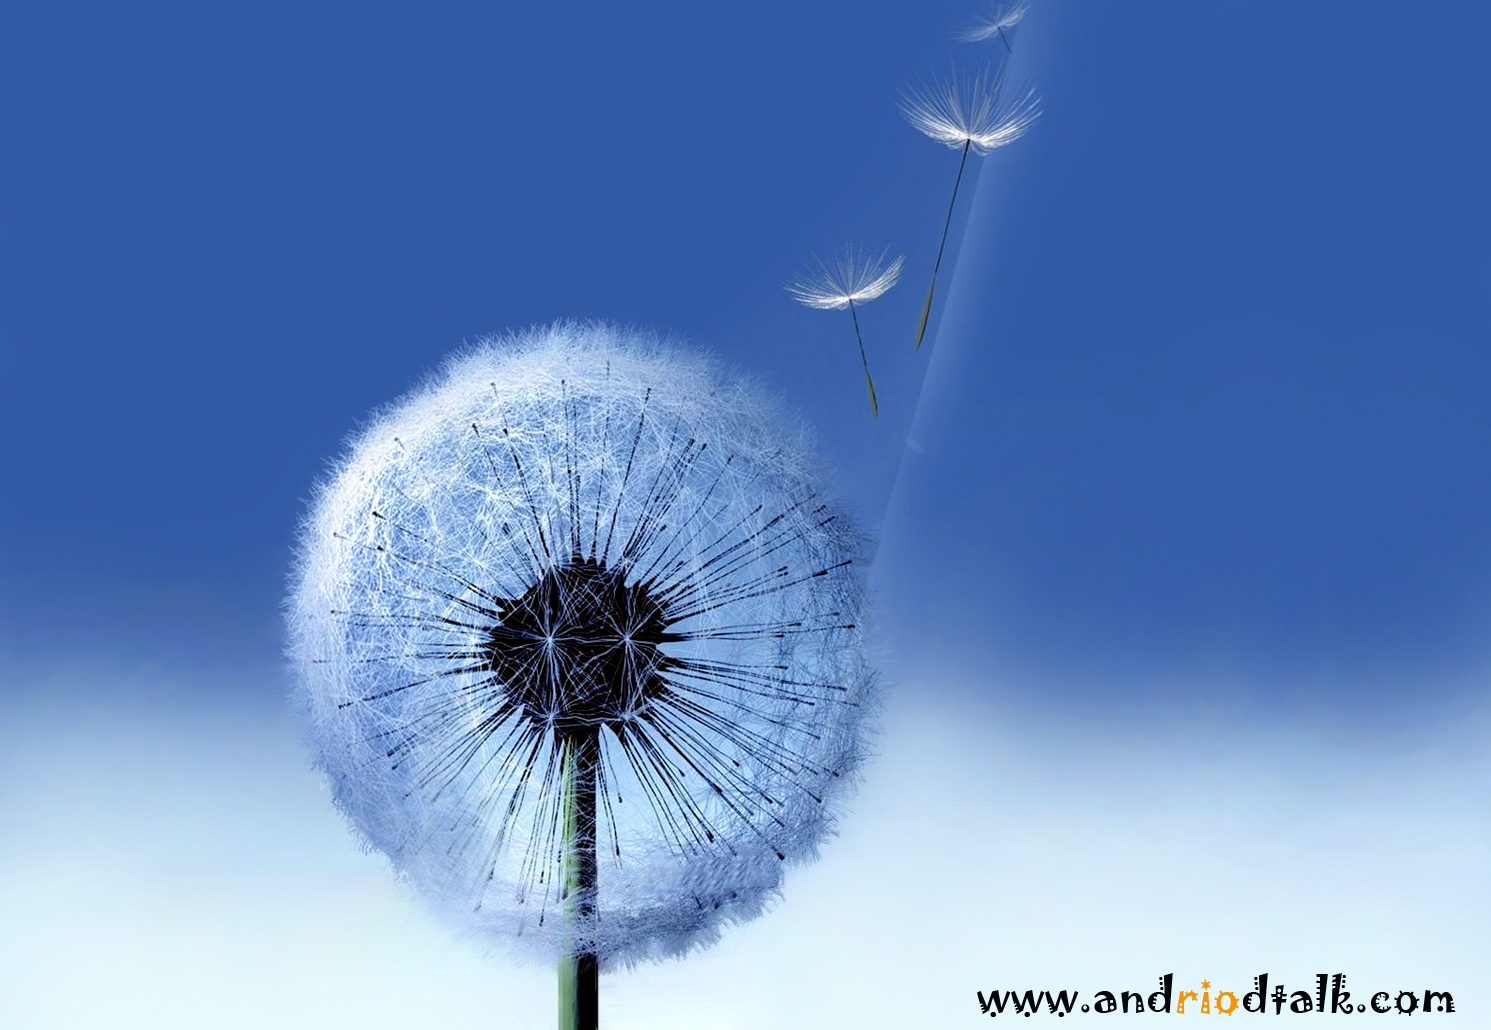  Dandelion live HD animated wallpaper android apk Android Talkative